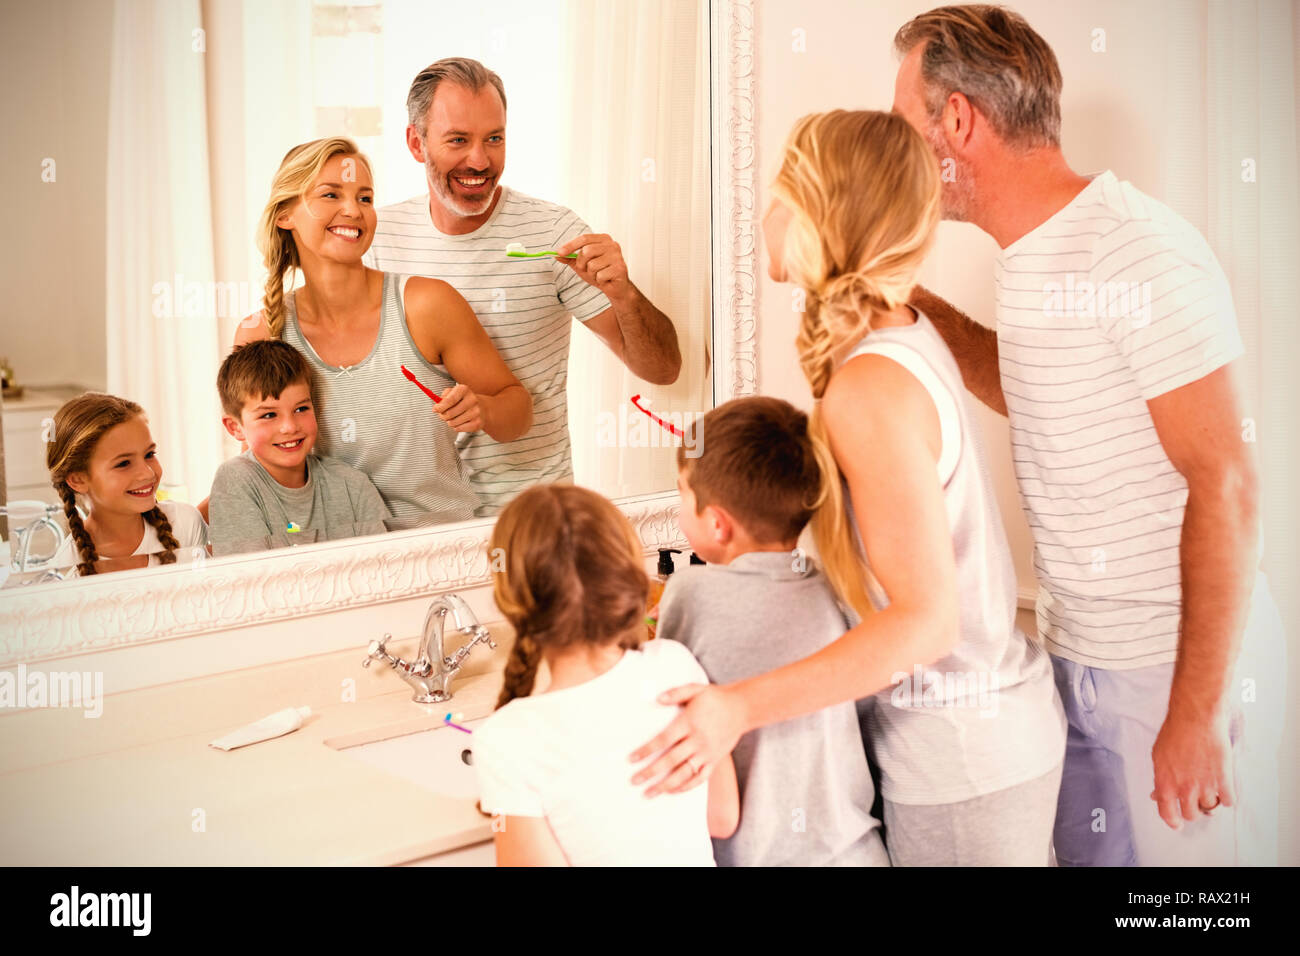 Parents and kids brushing teeth in bathroom Stock Photo